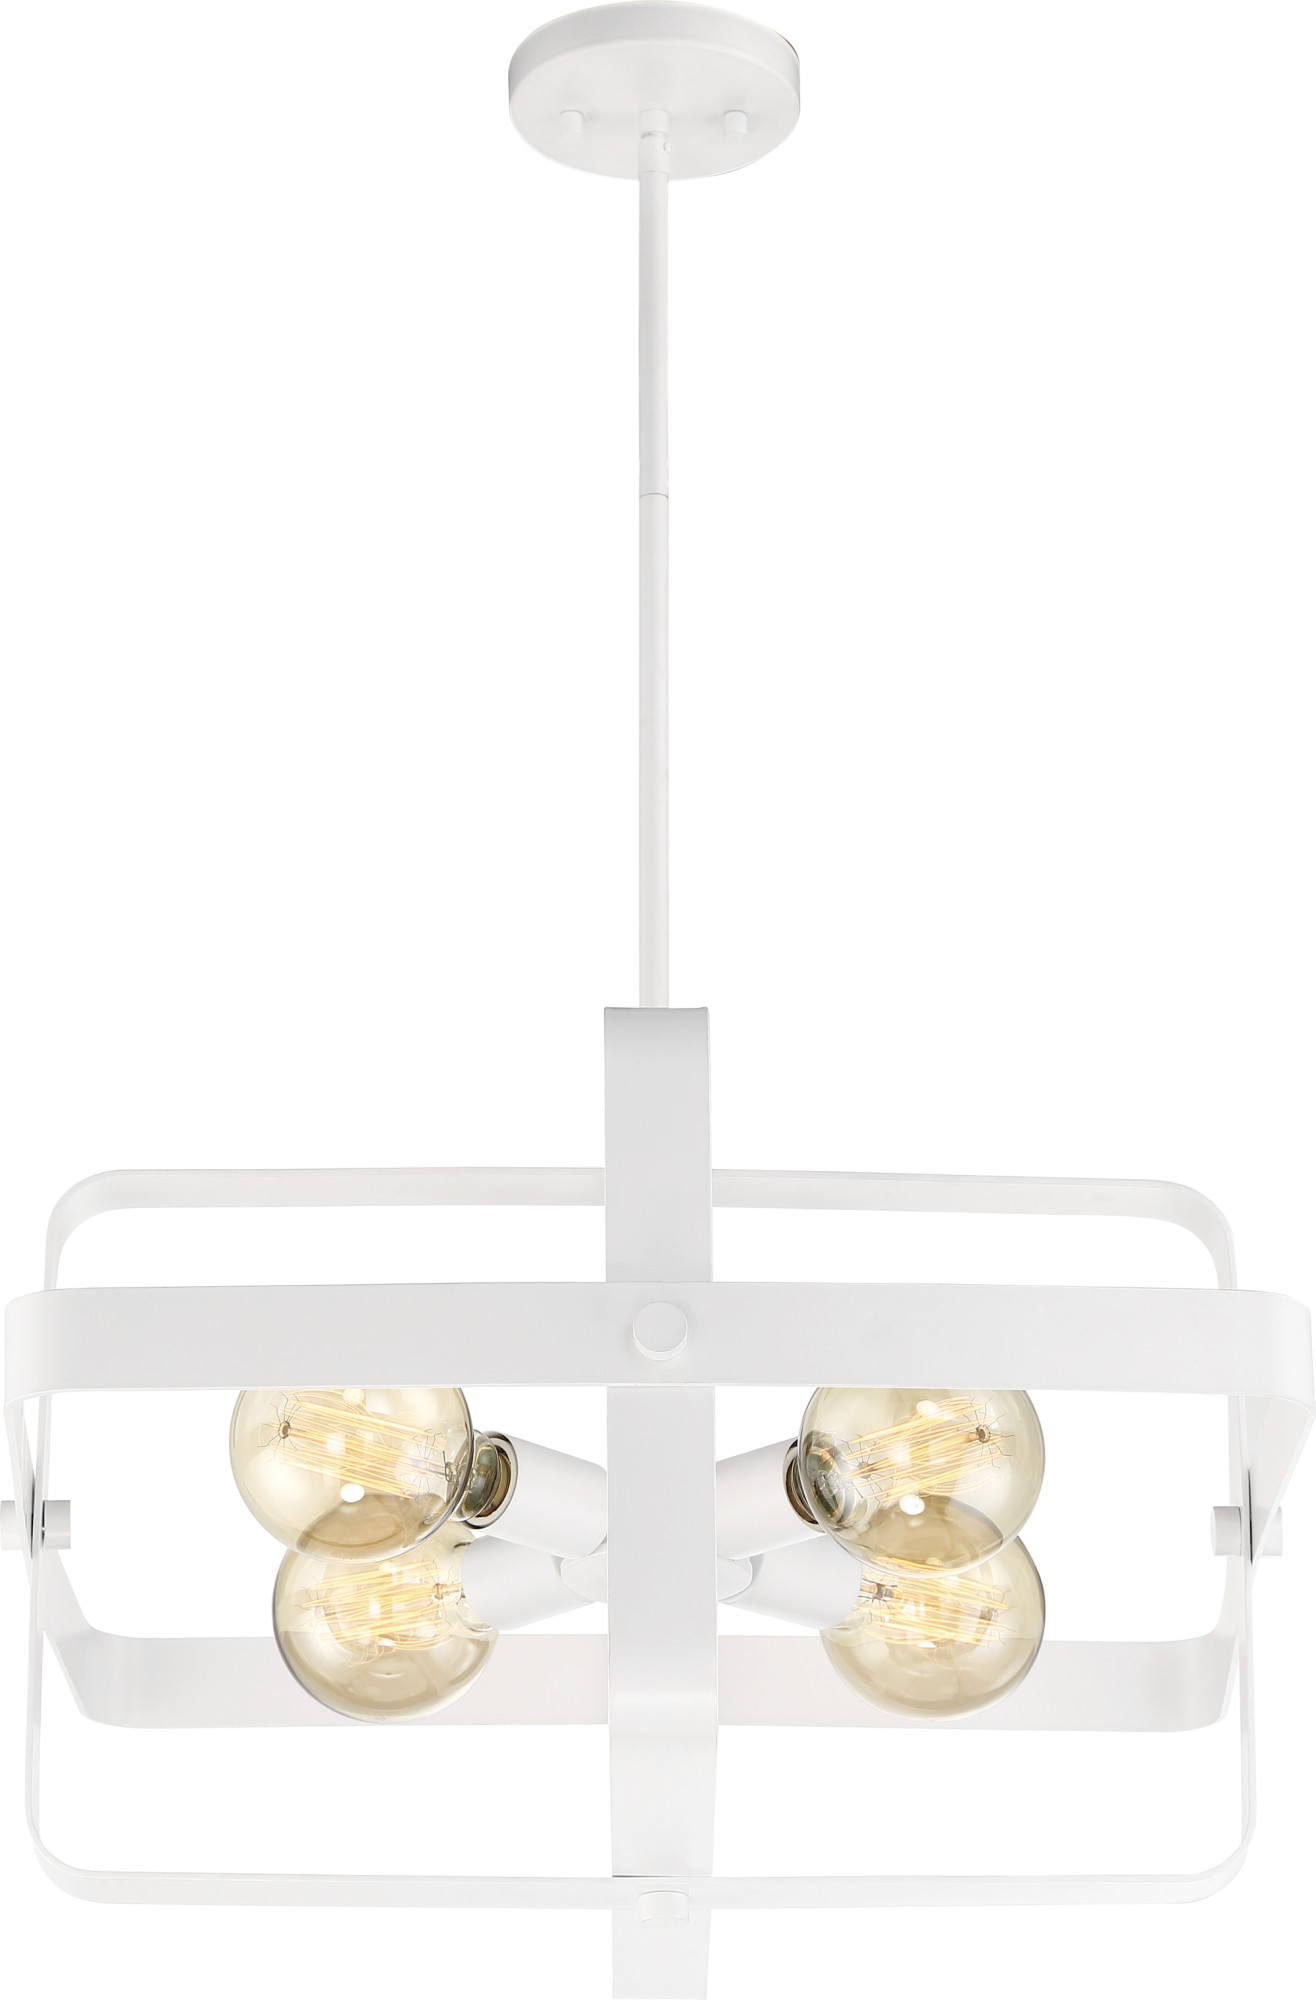 60/6722-Nuvo Lighting-Prana-4 Light Pendant-20 Inches Wide by 12 Inches High-White Finish - image 4 of 7